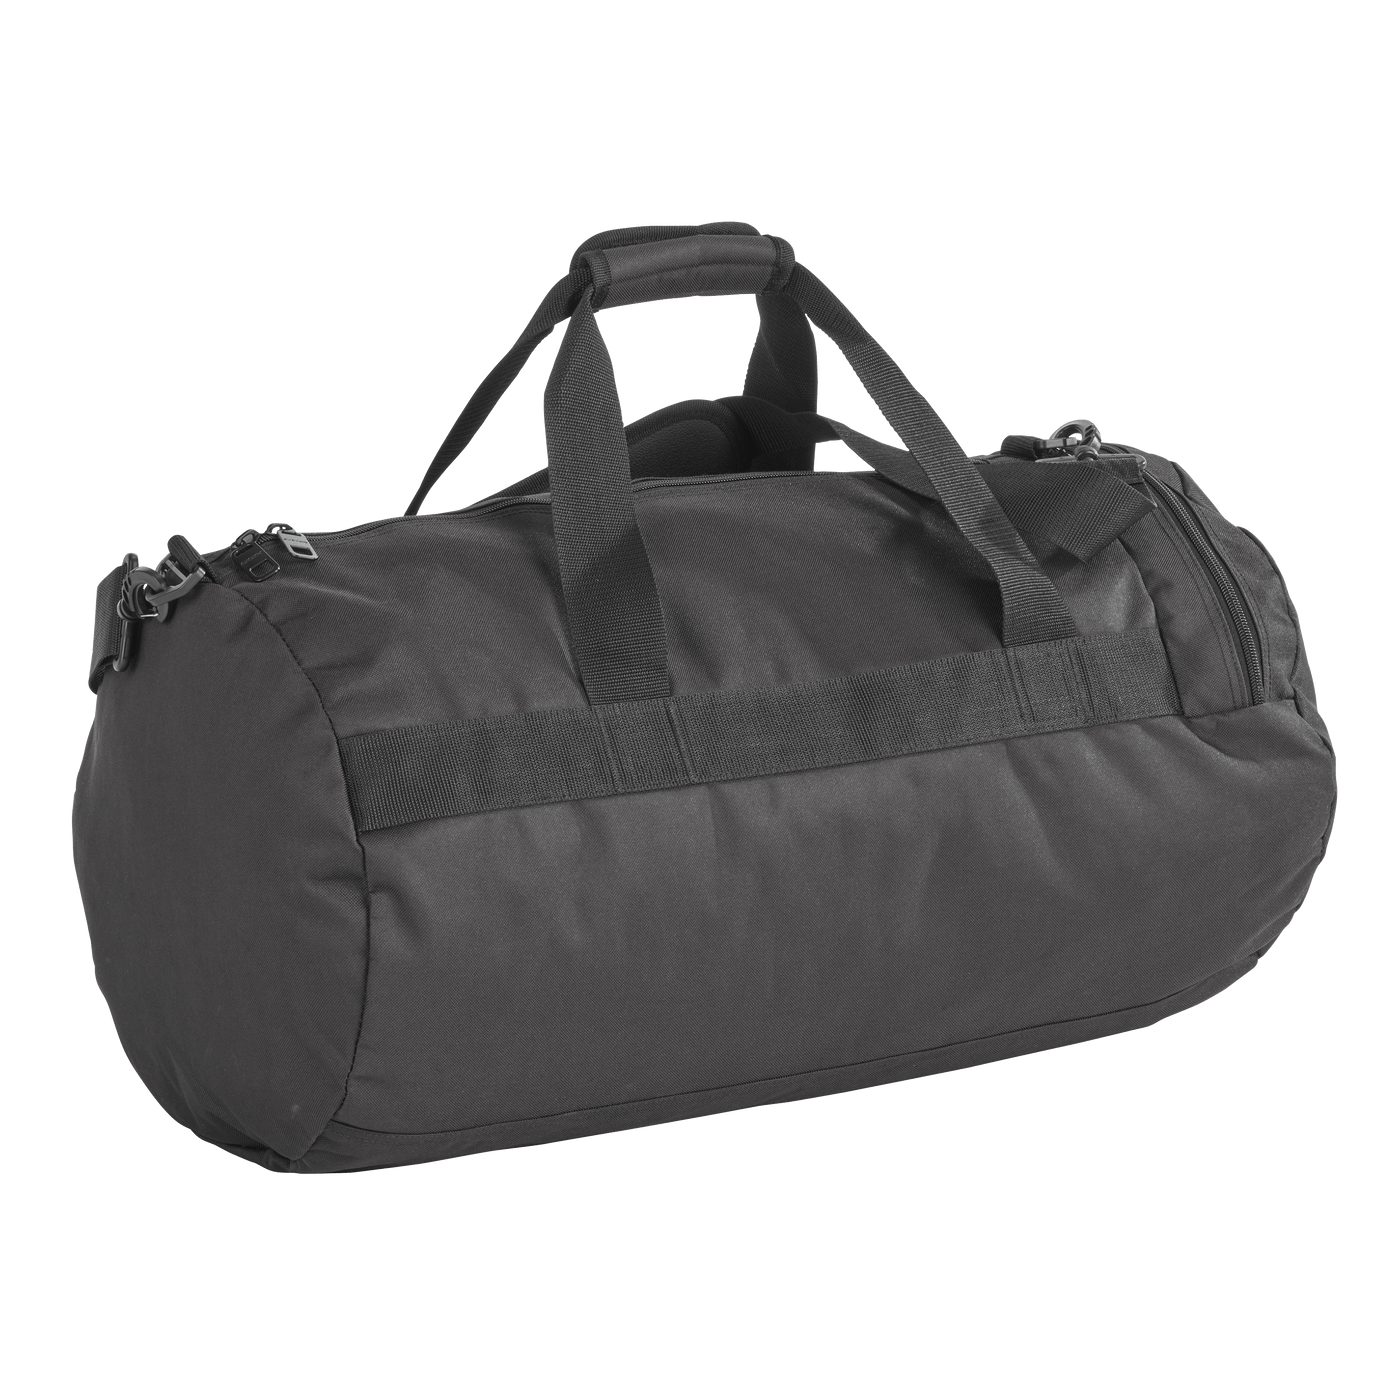 CCM Sport Duffle Bag - The Hockey Shop Source For Sports